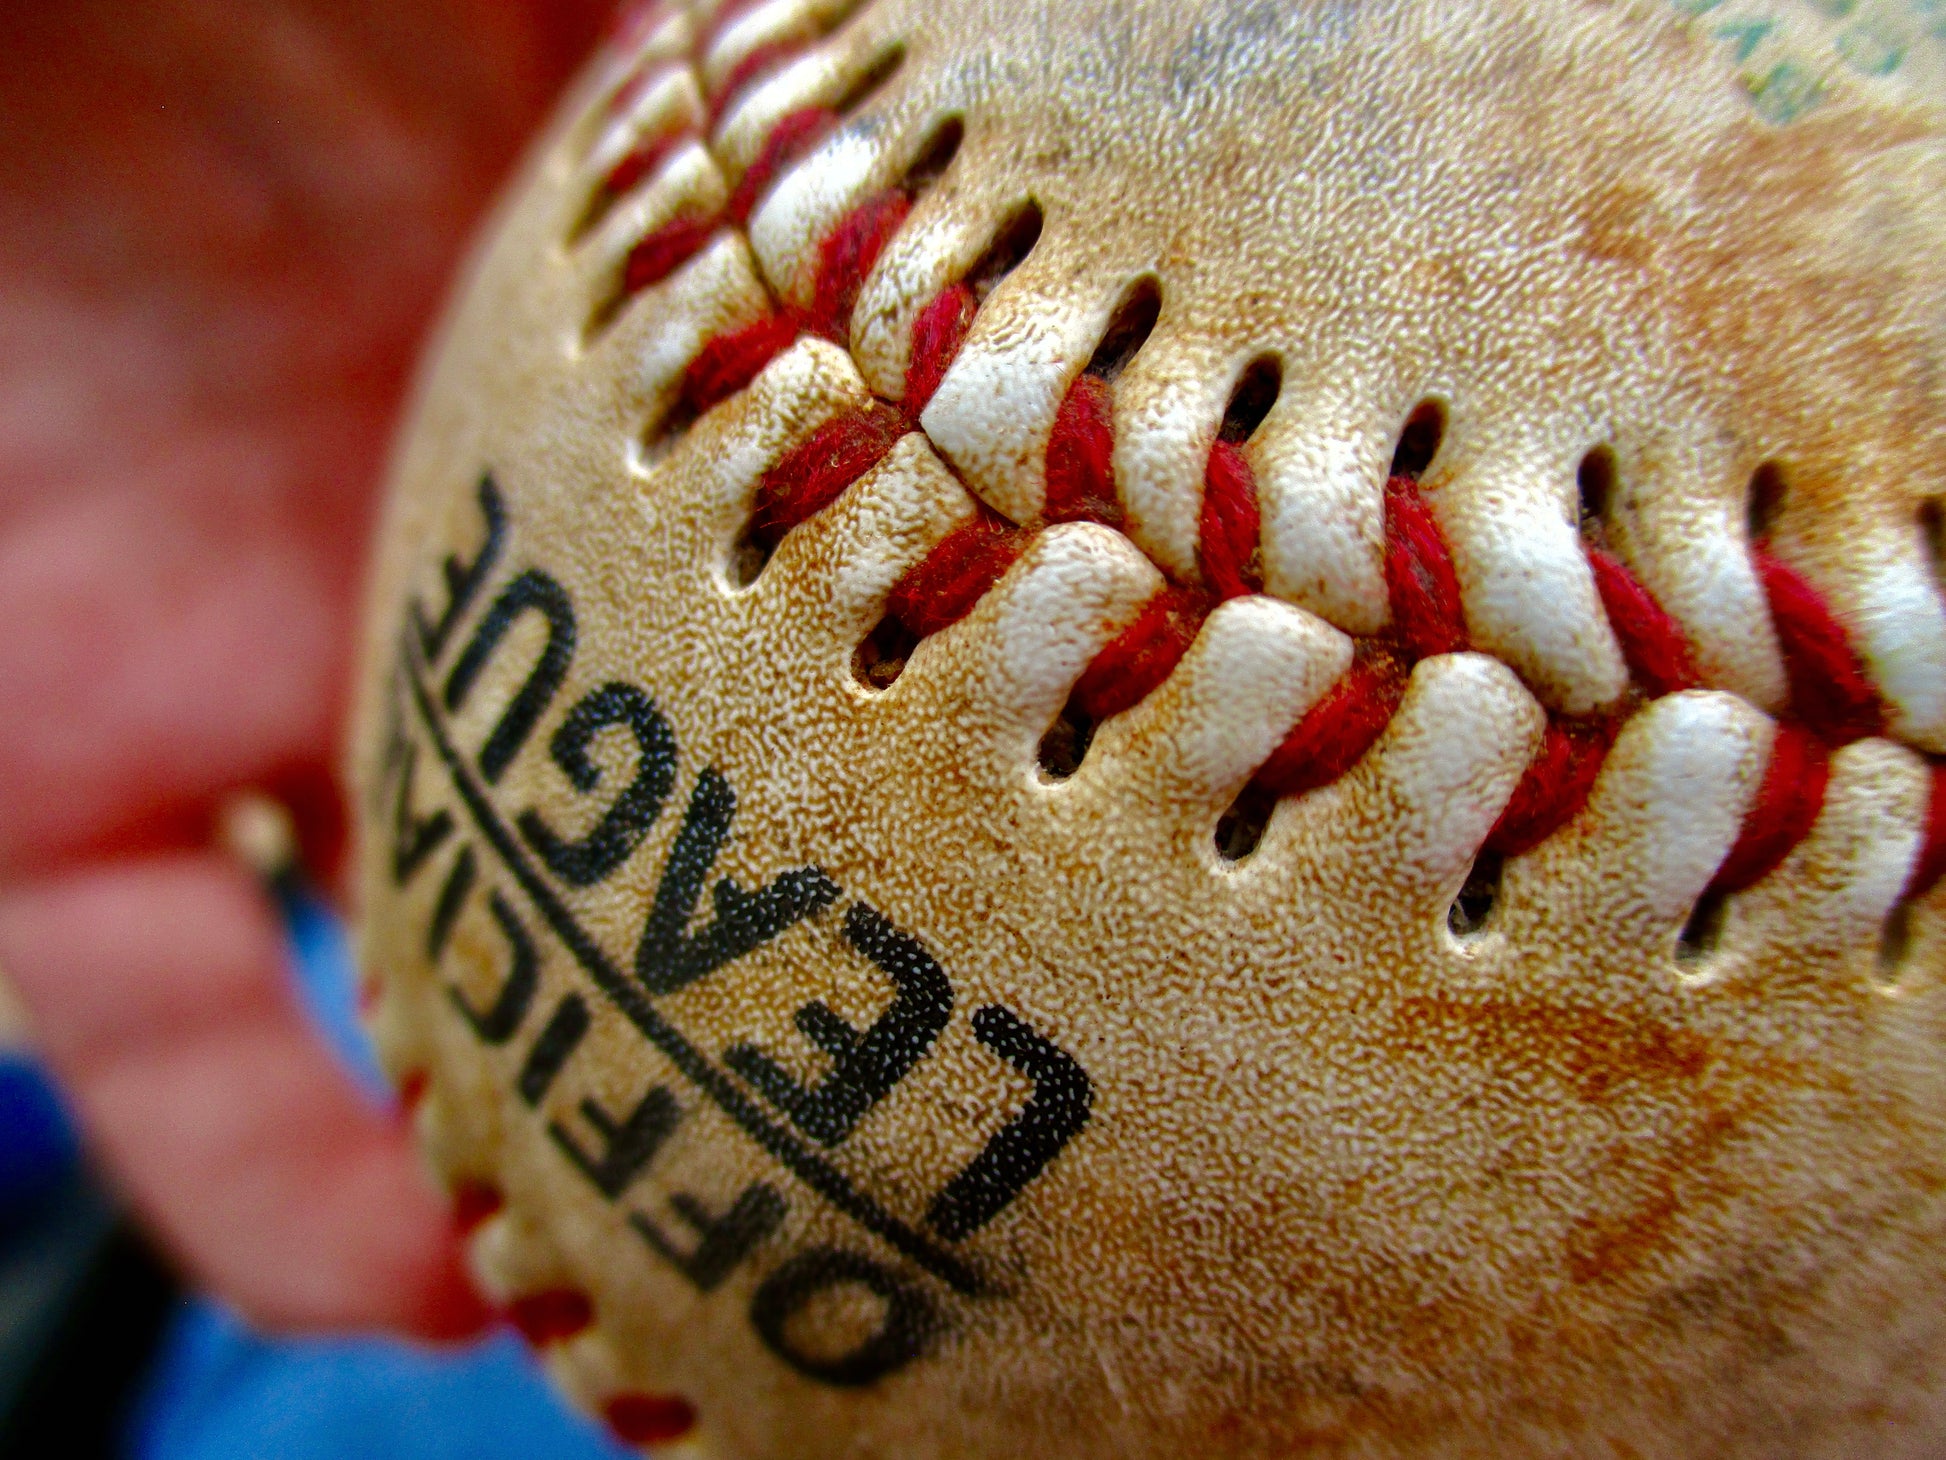 This is an up close photo of a baseball